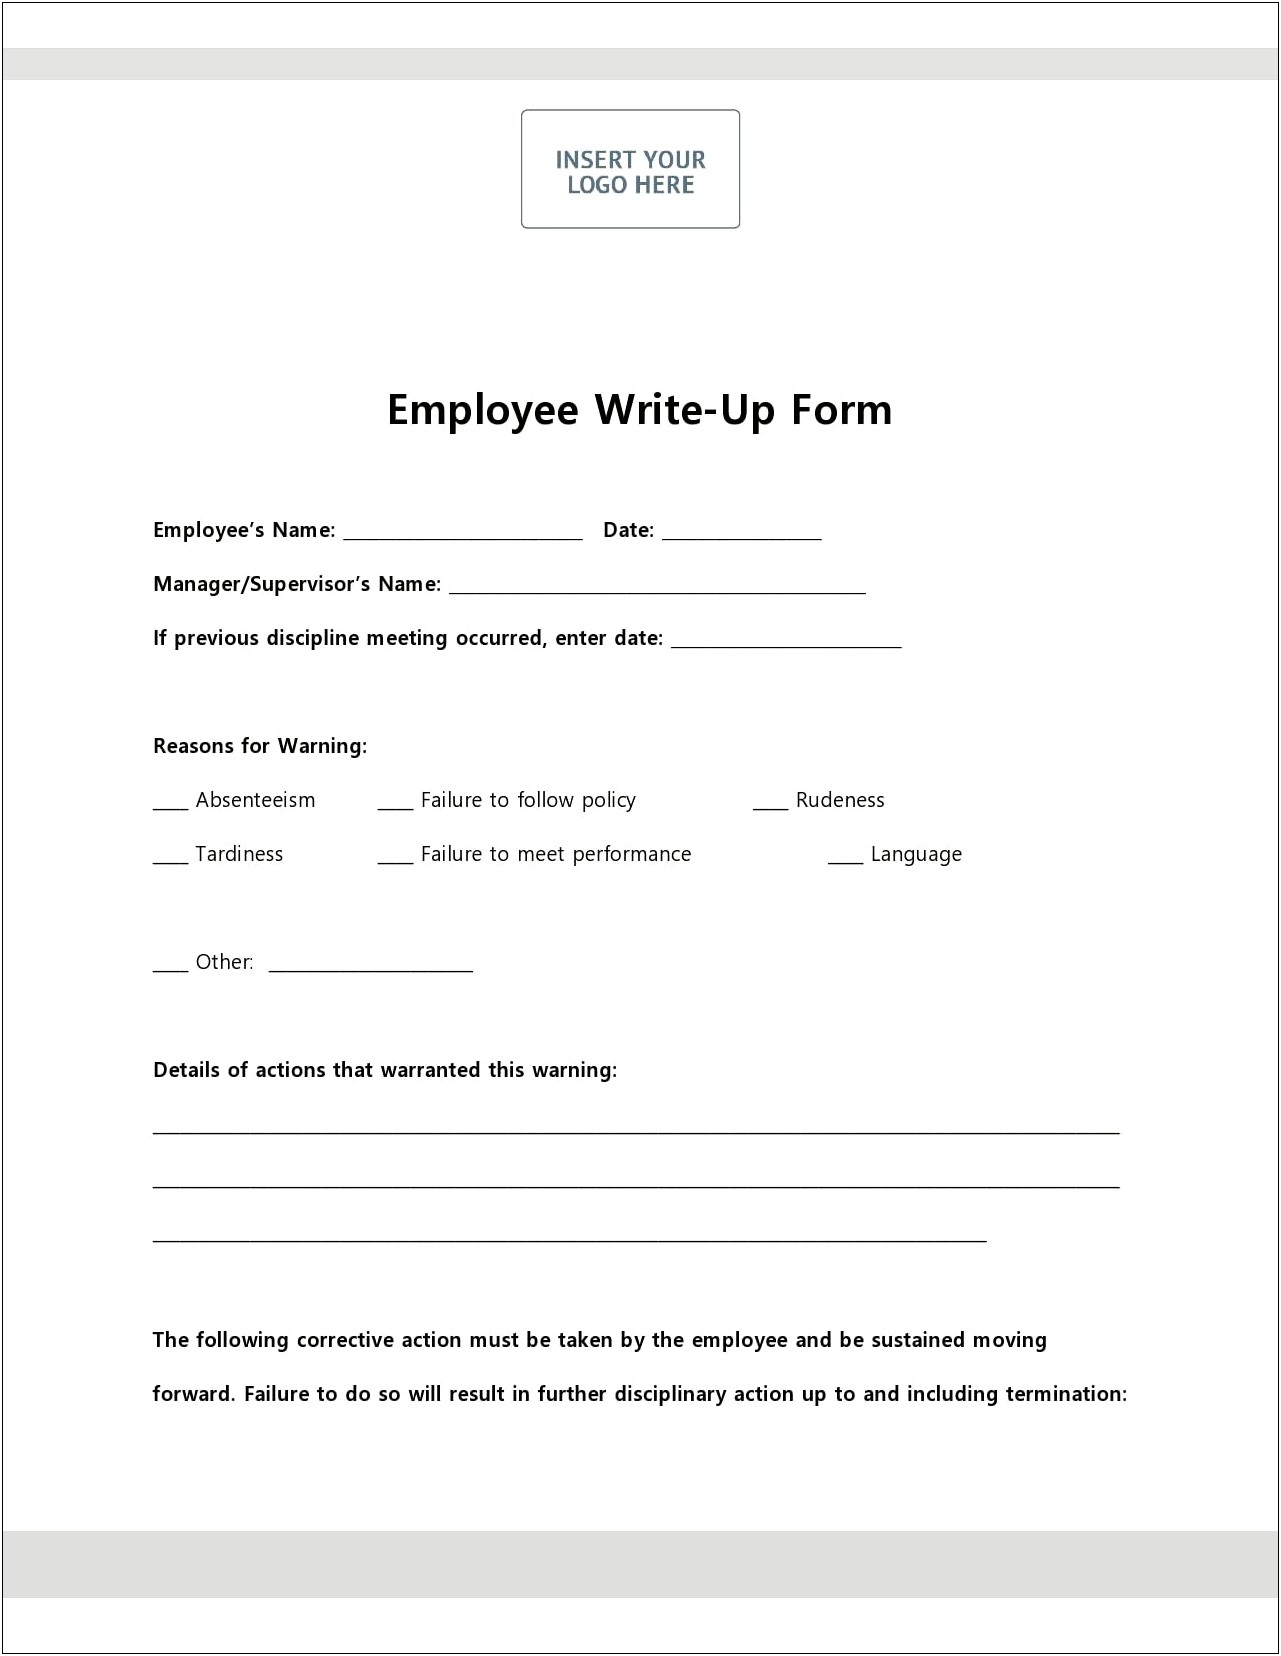 Employee Write Up Form Template Word